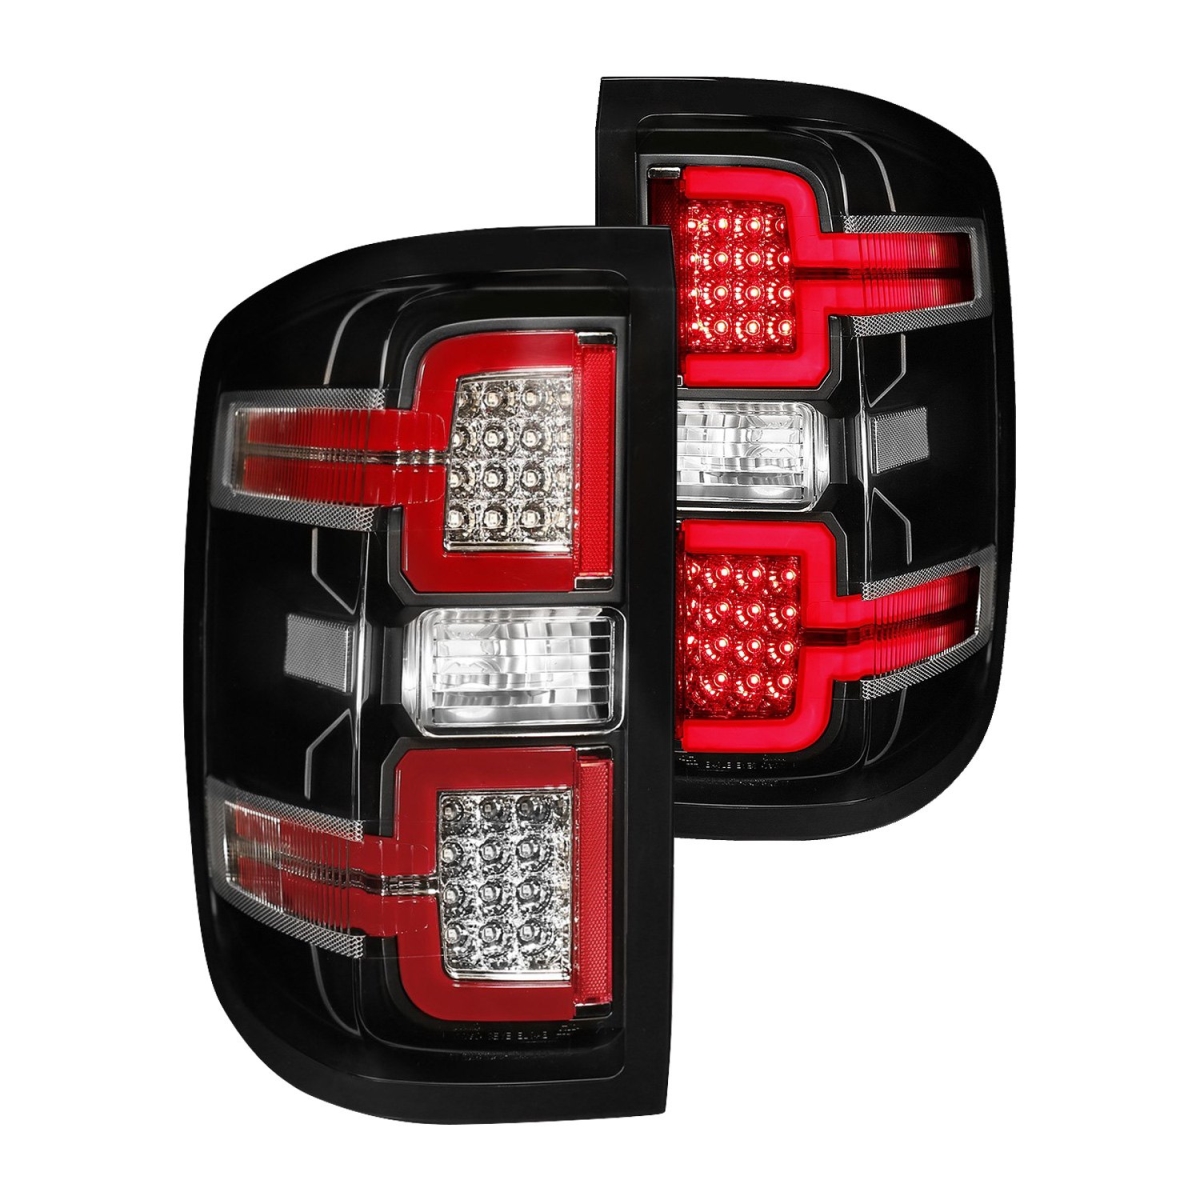 311289 Black Sequential Fiber Optic Led Tail Light For Chevy Silverado 1500-3500